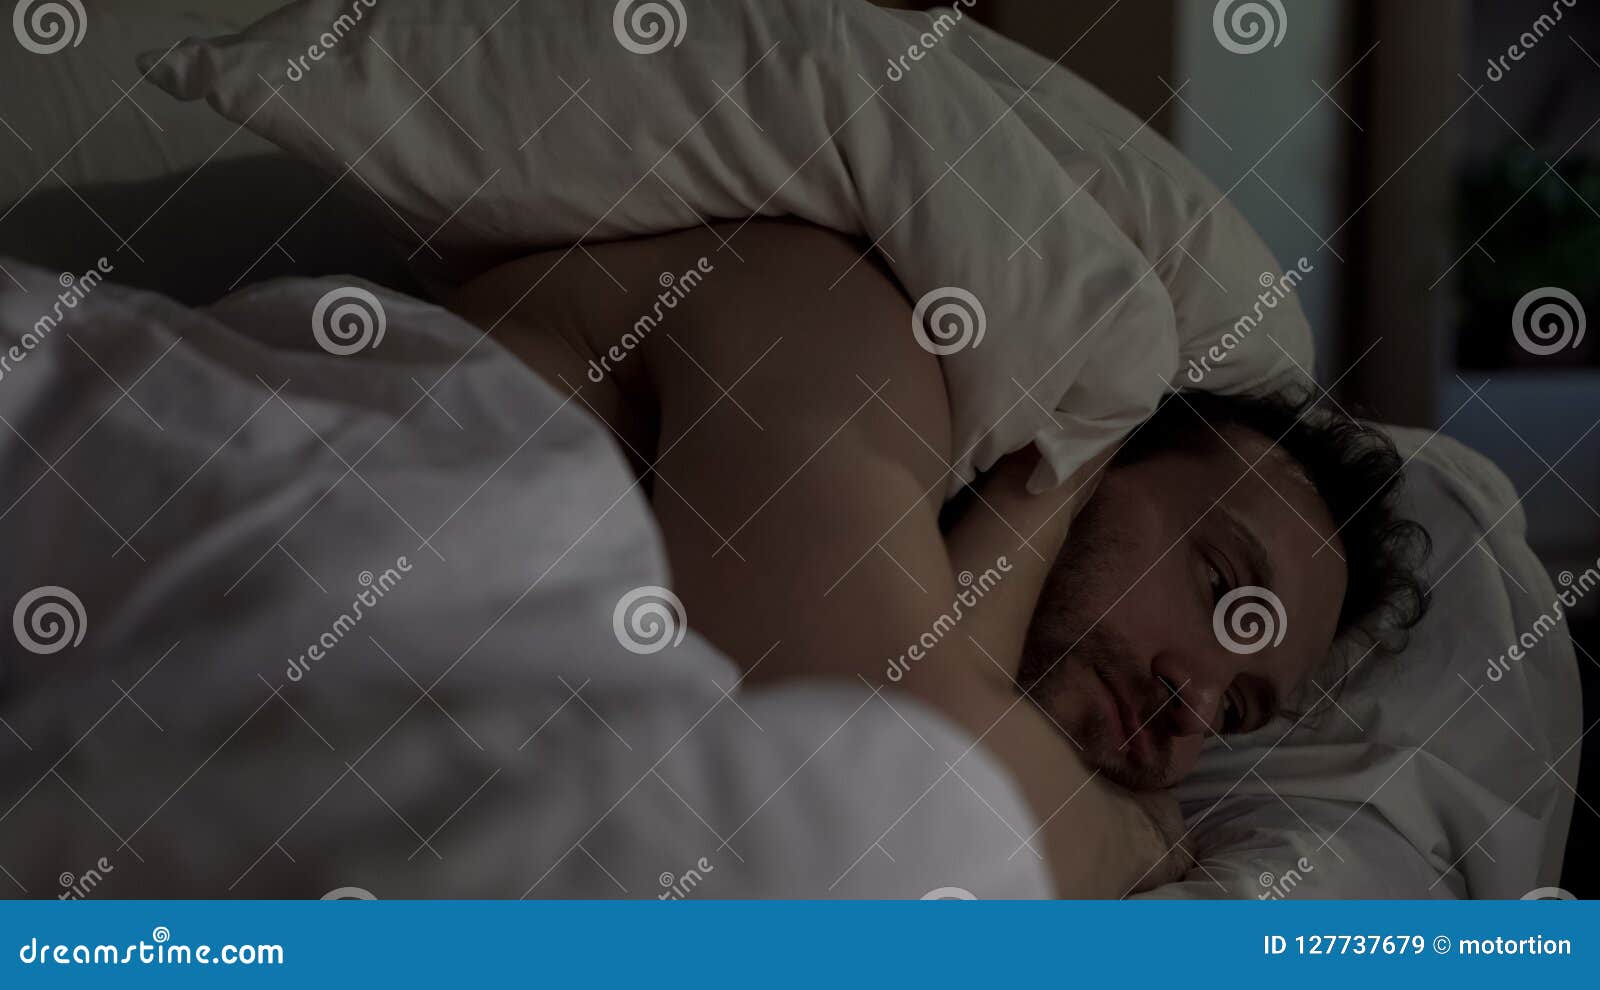 annoyed man tossing and turning in bed unable to fall asleep, noisy neighbors